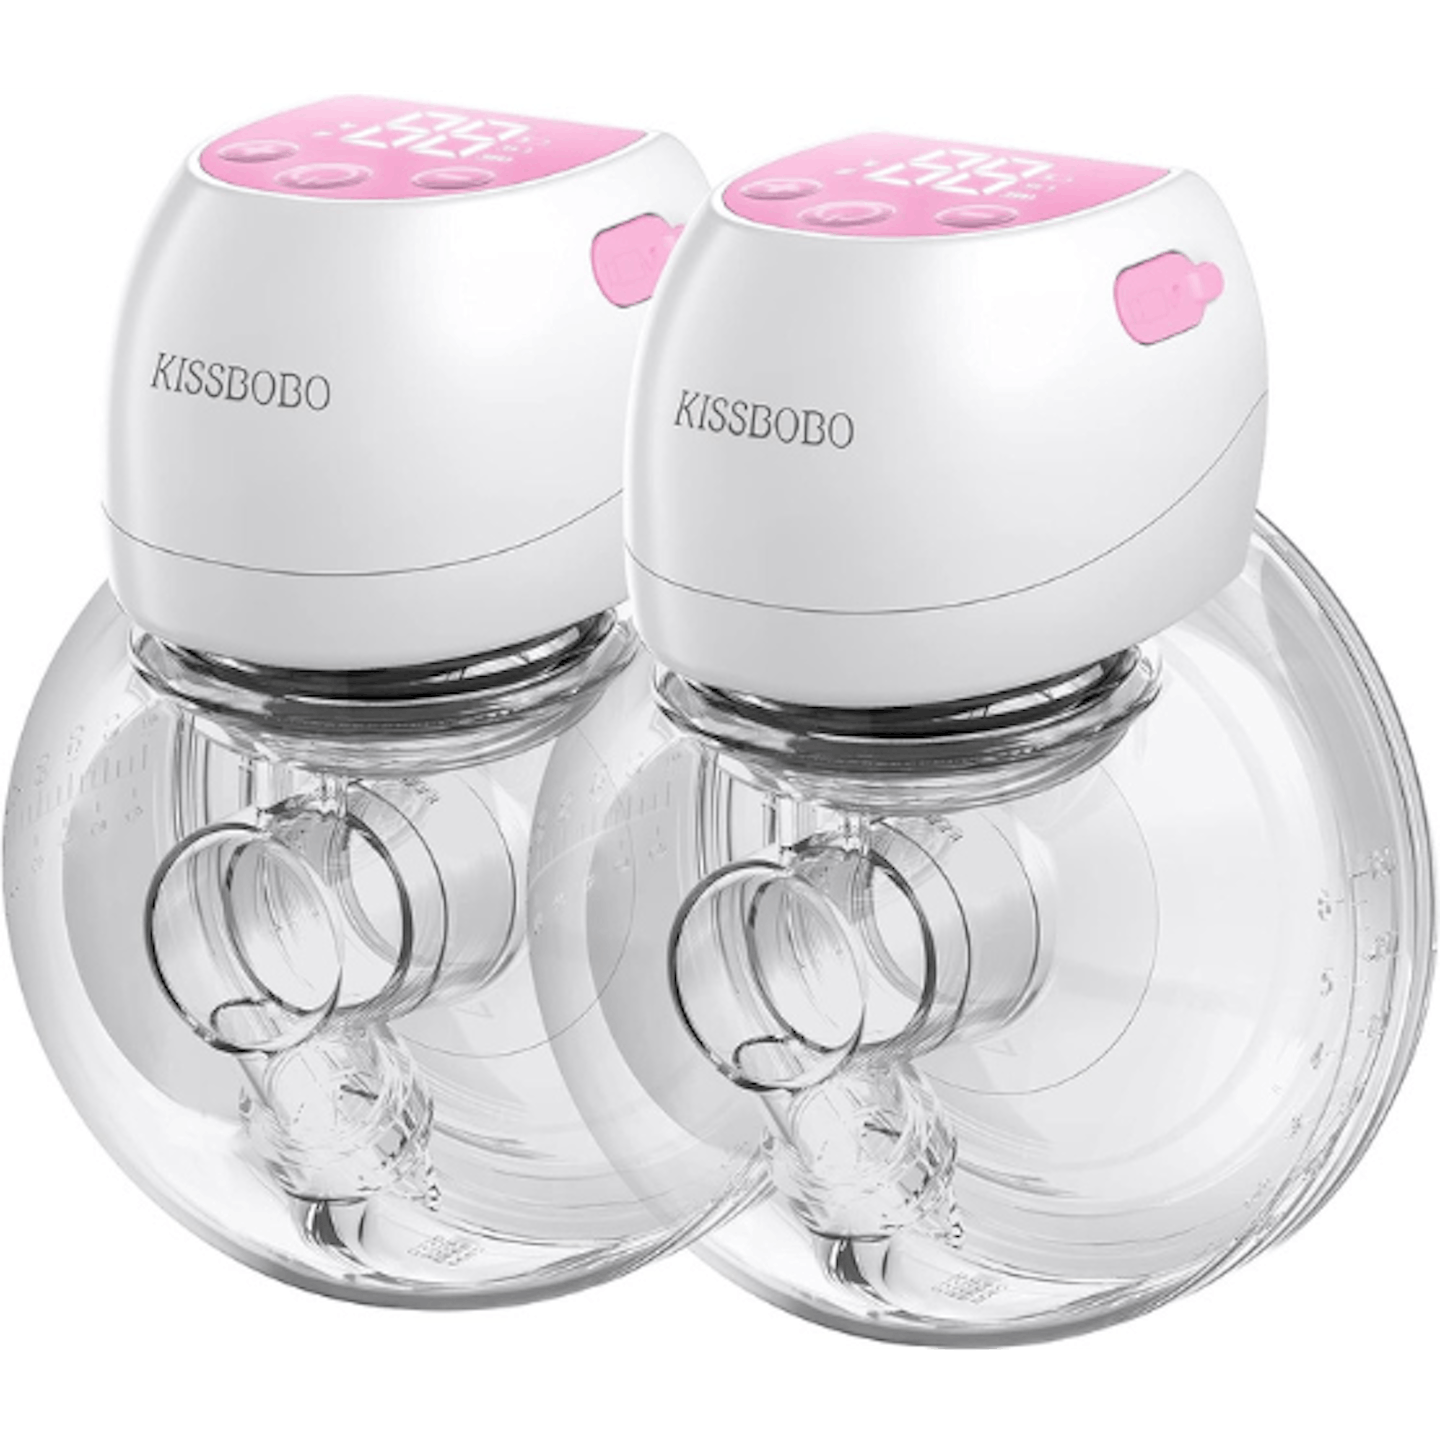 Customer Reviews: Momcozy Double M5 Wearable Electric Breast Pump